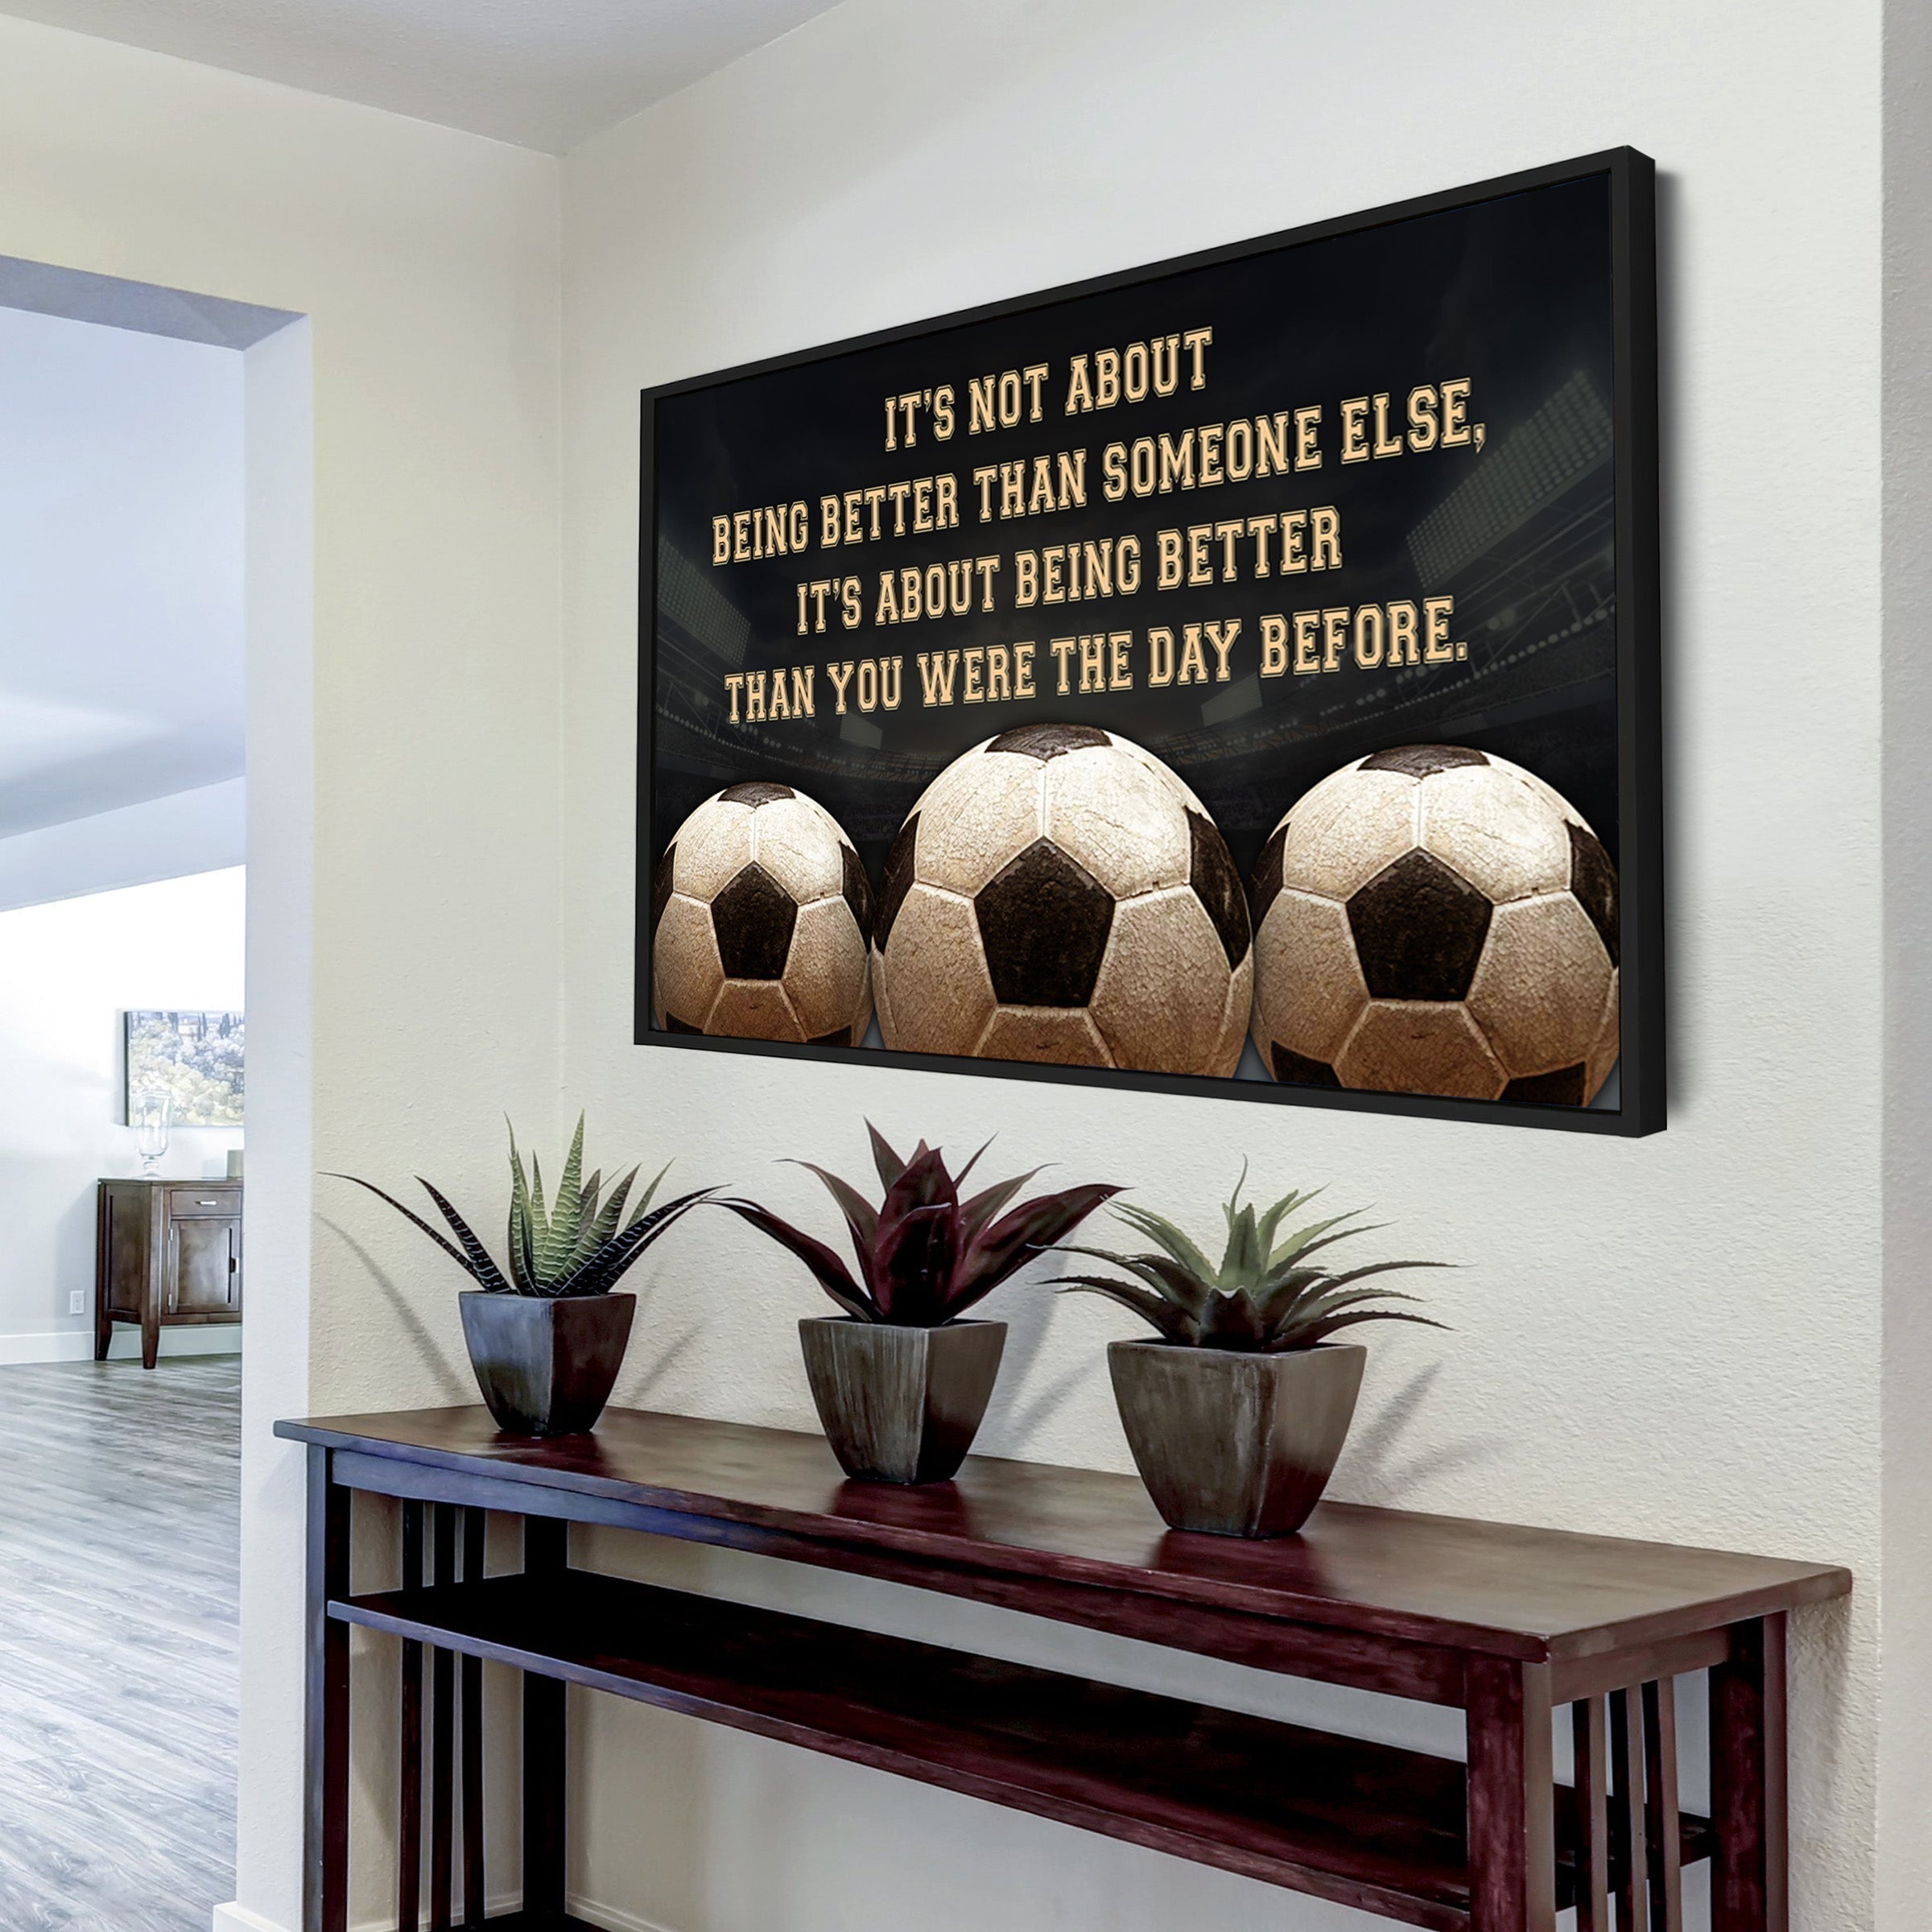 Volleyball customizable poster canvas